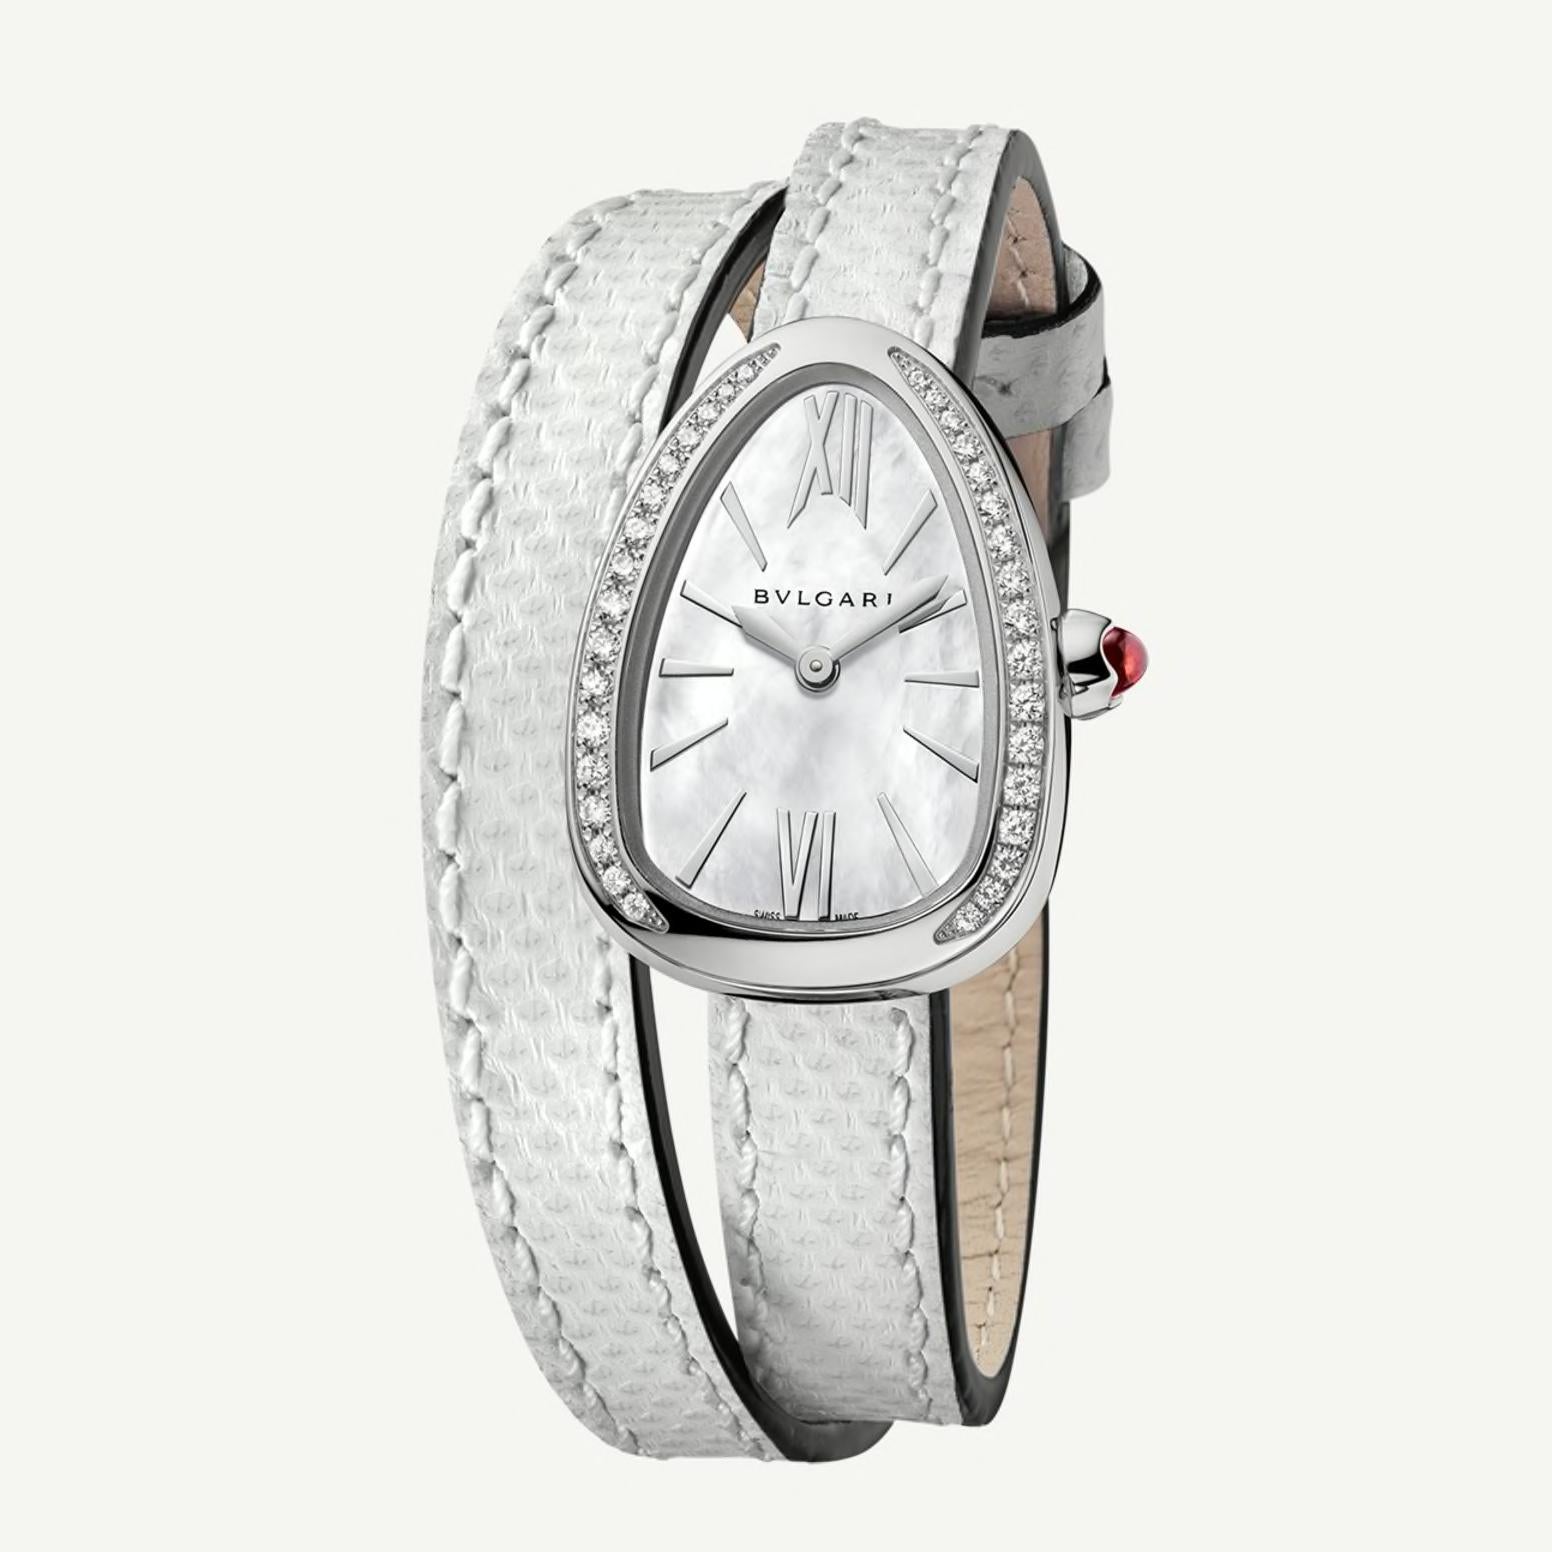 Contemporary Bvlgari Serpenti Diamond Watch with Double Spiral White Karung Strap Box Papers